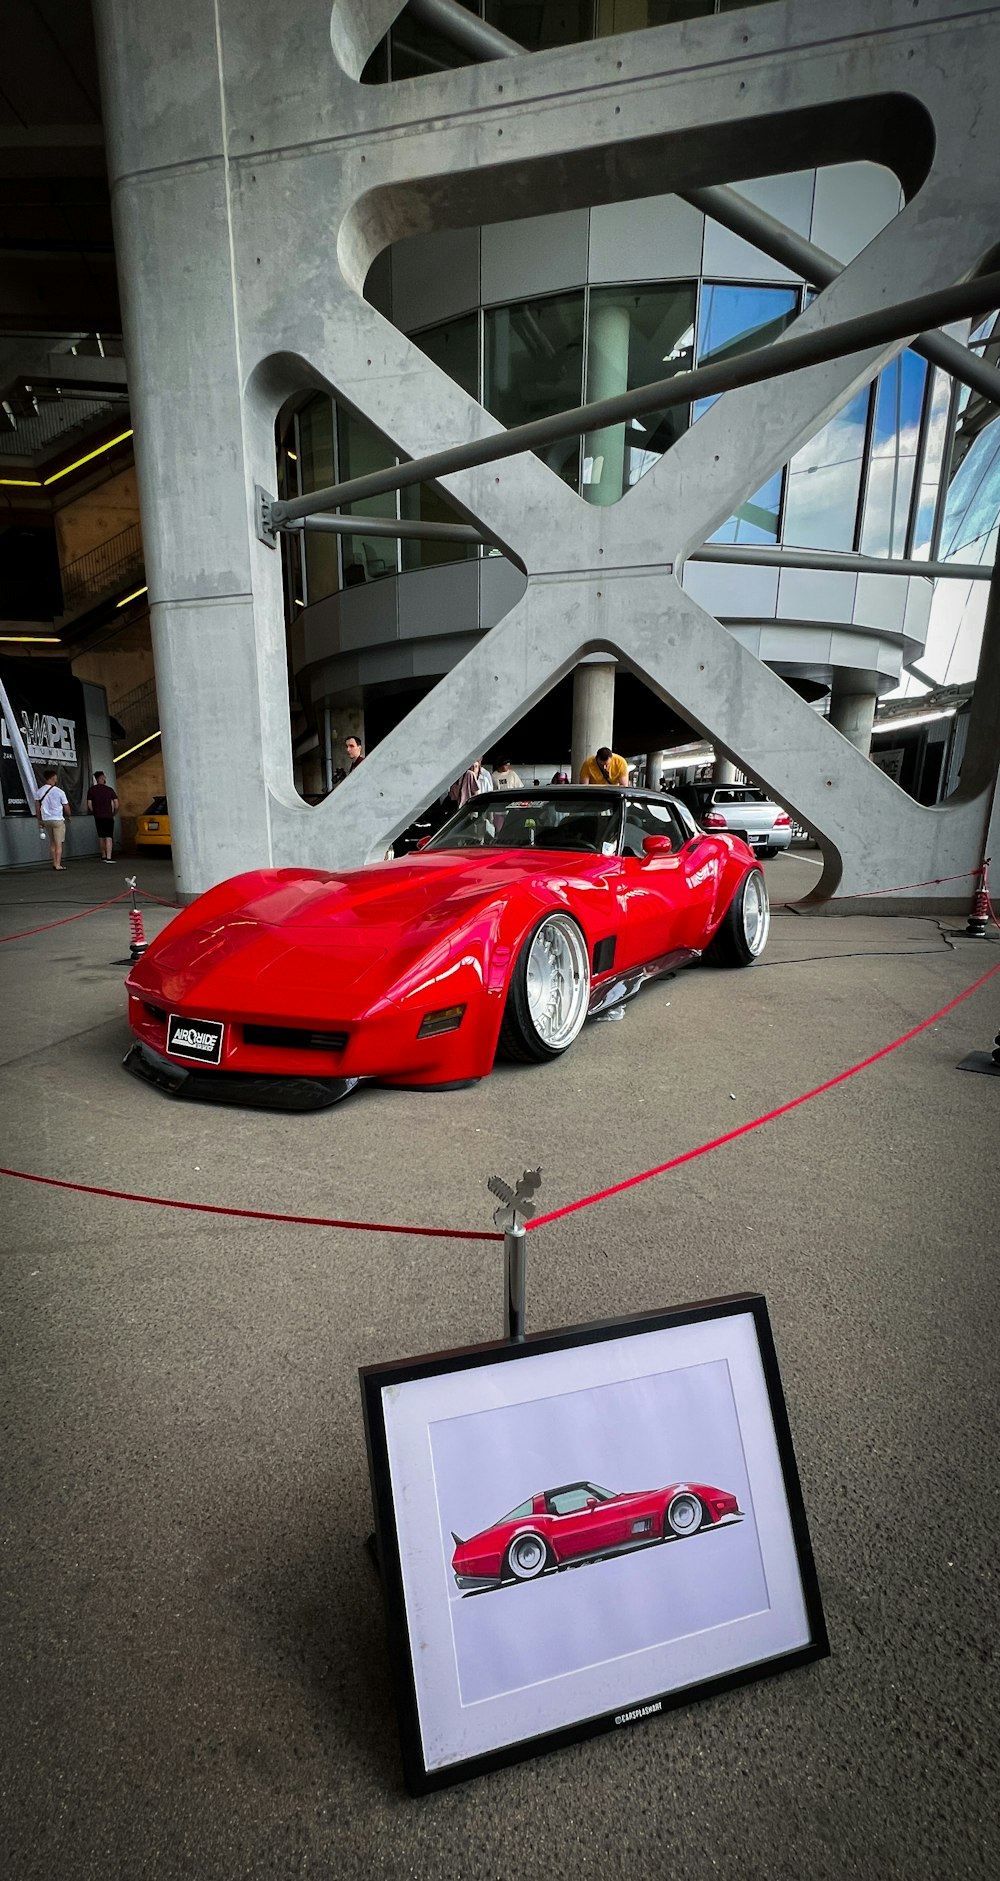 a red sports car is on display in a museum